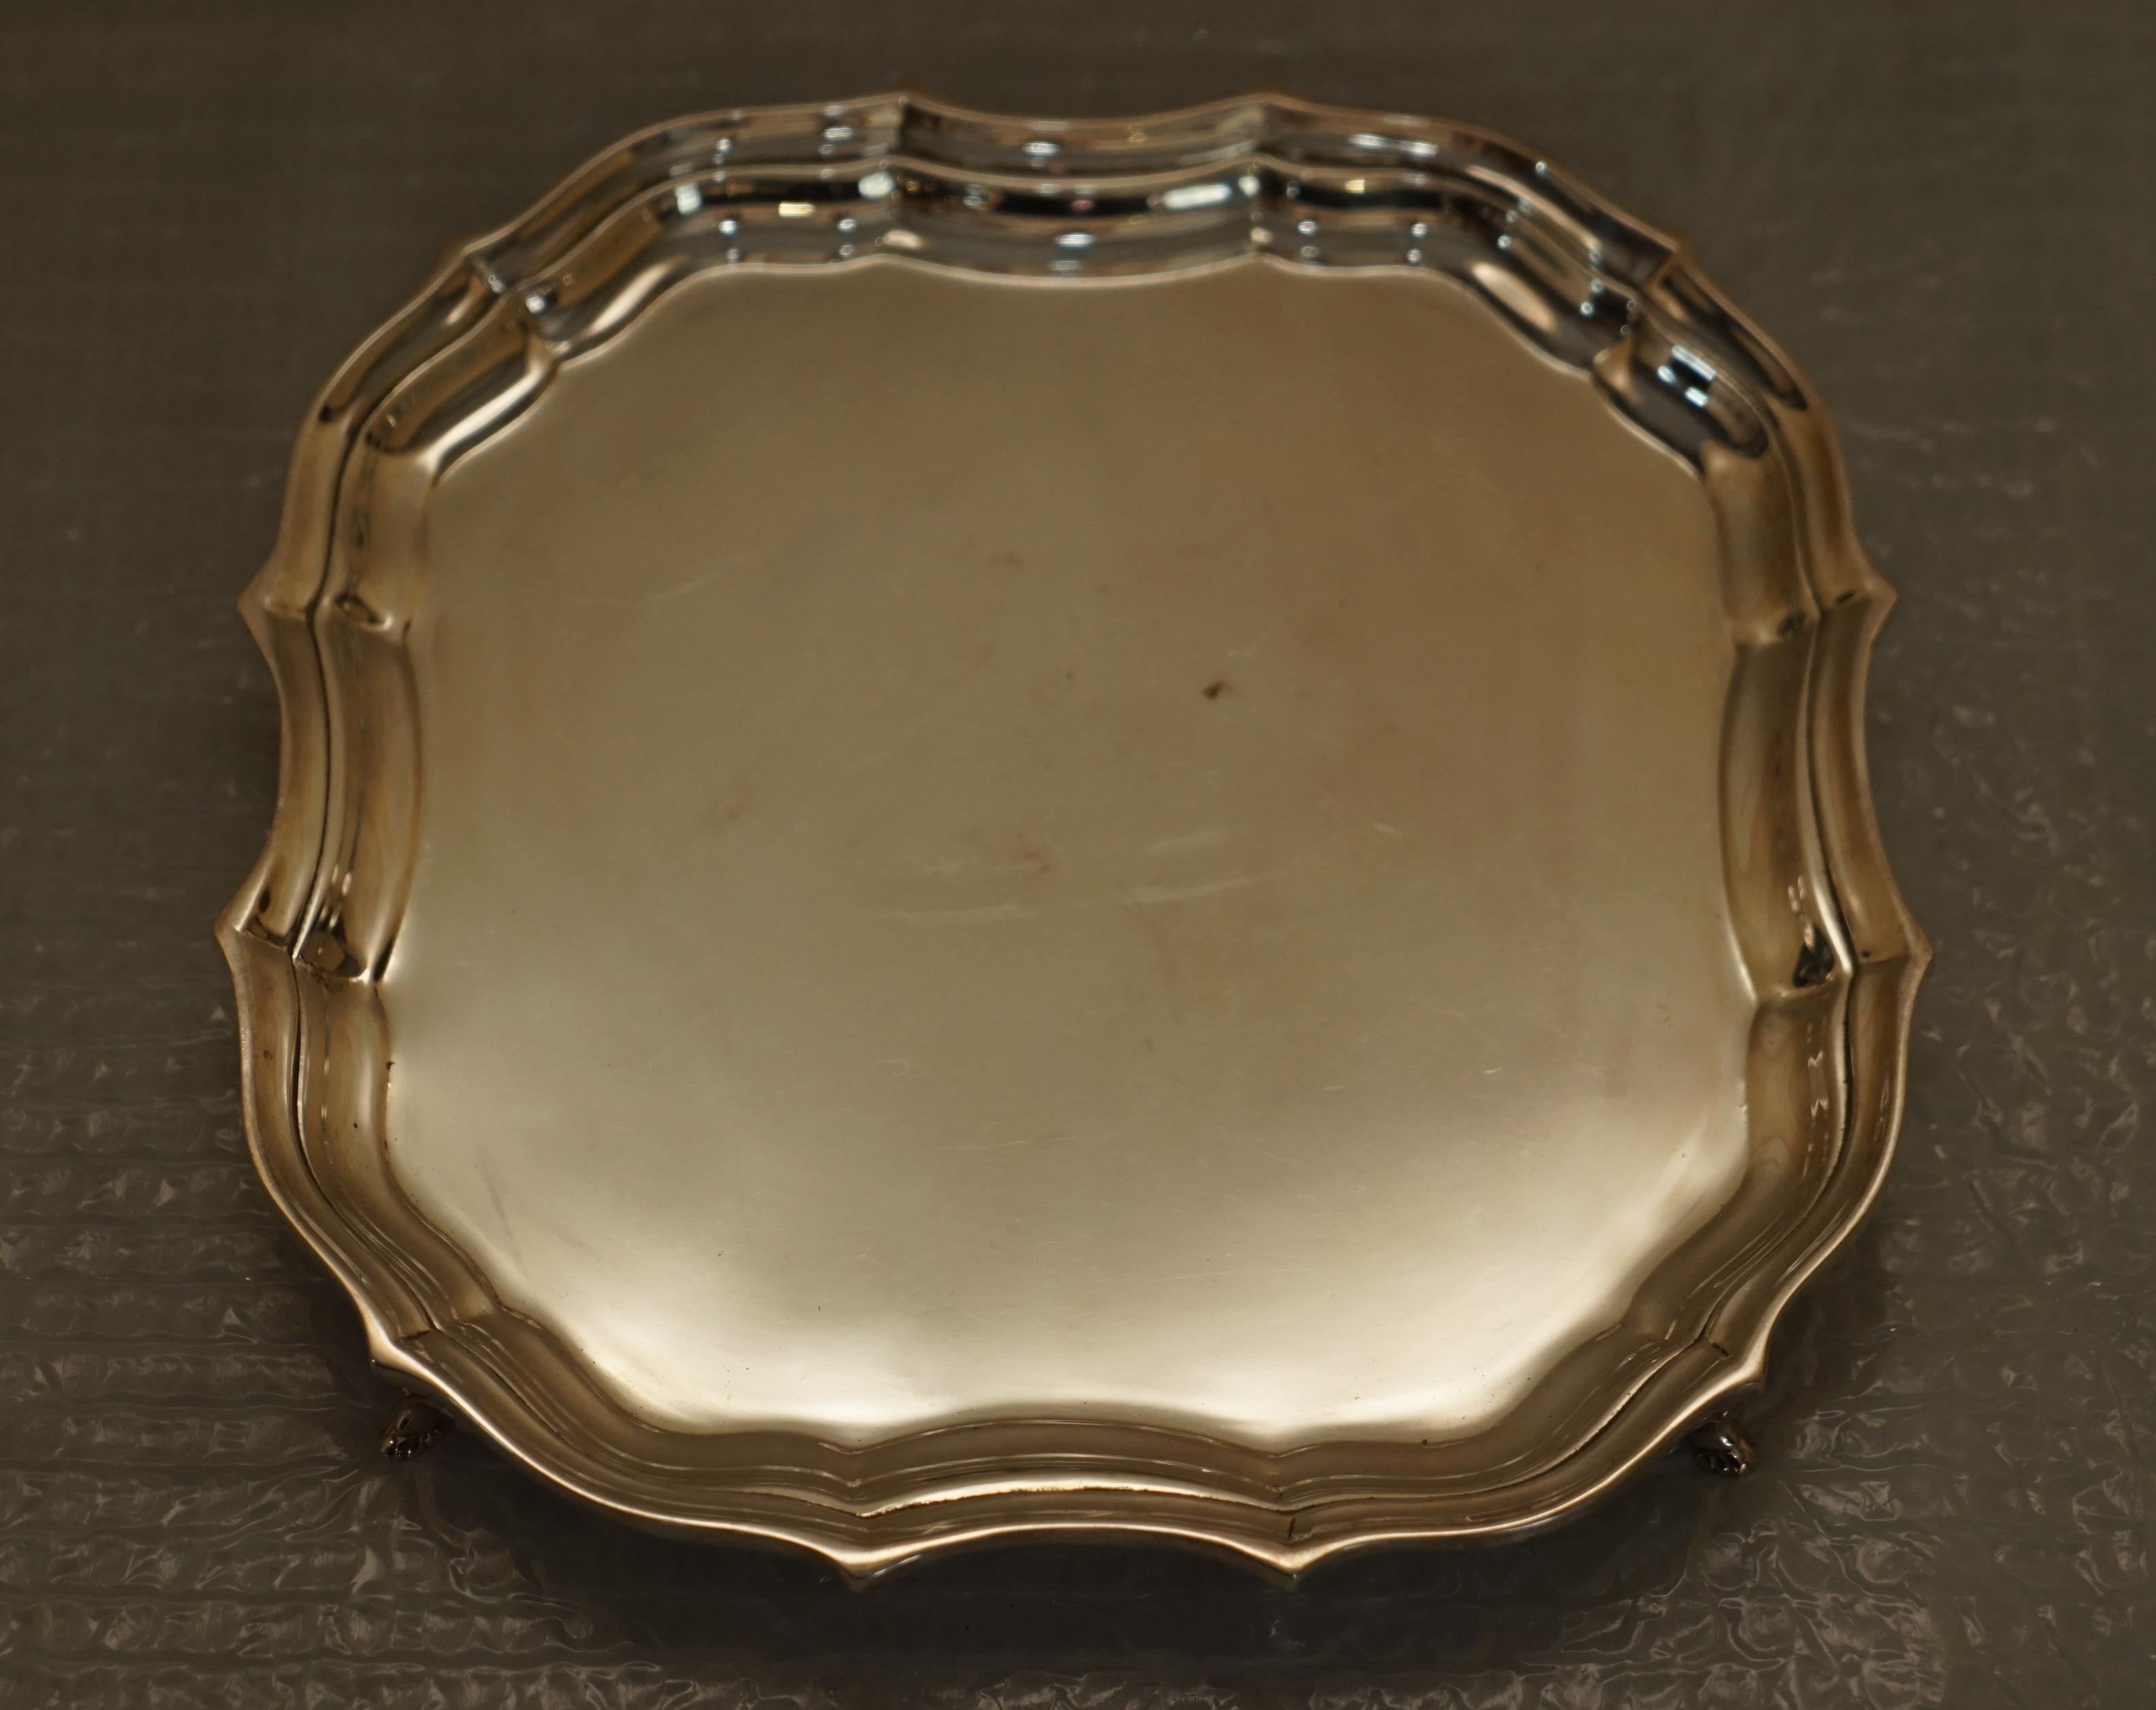 Hand-Crafted VINTAGE RALPH LAUREN SERVING TRAY PART OF A SUITE WiTH PIE CRUST EDGE